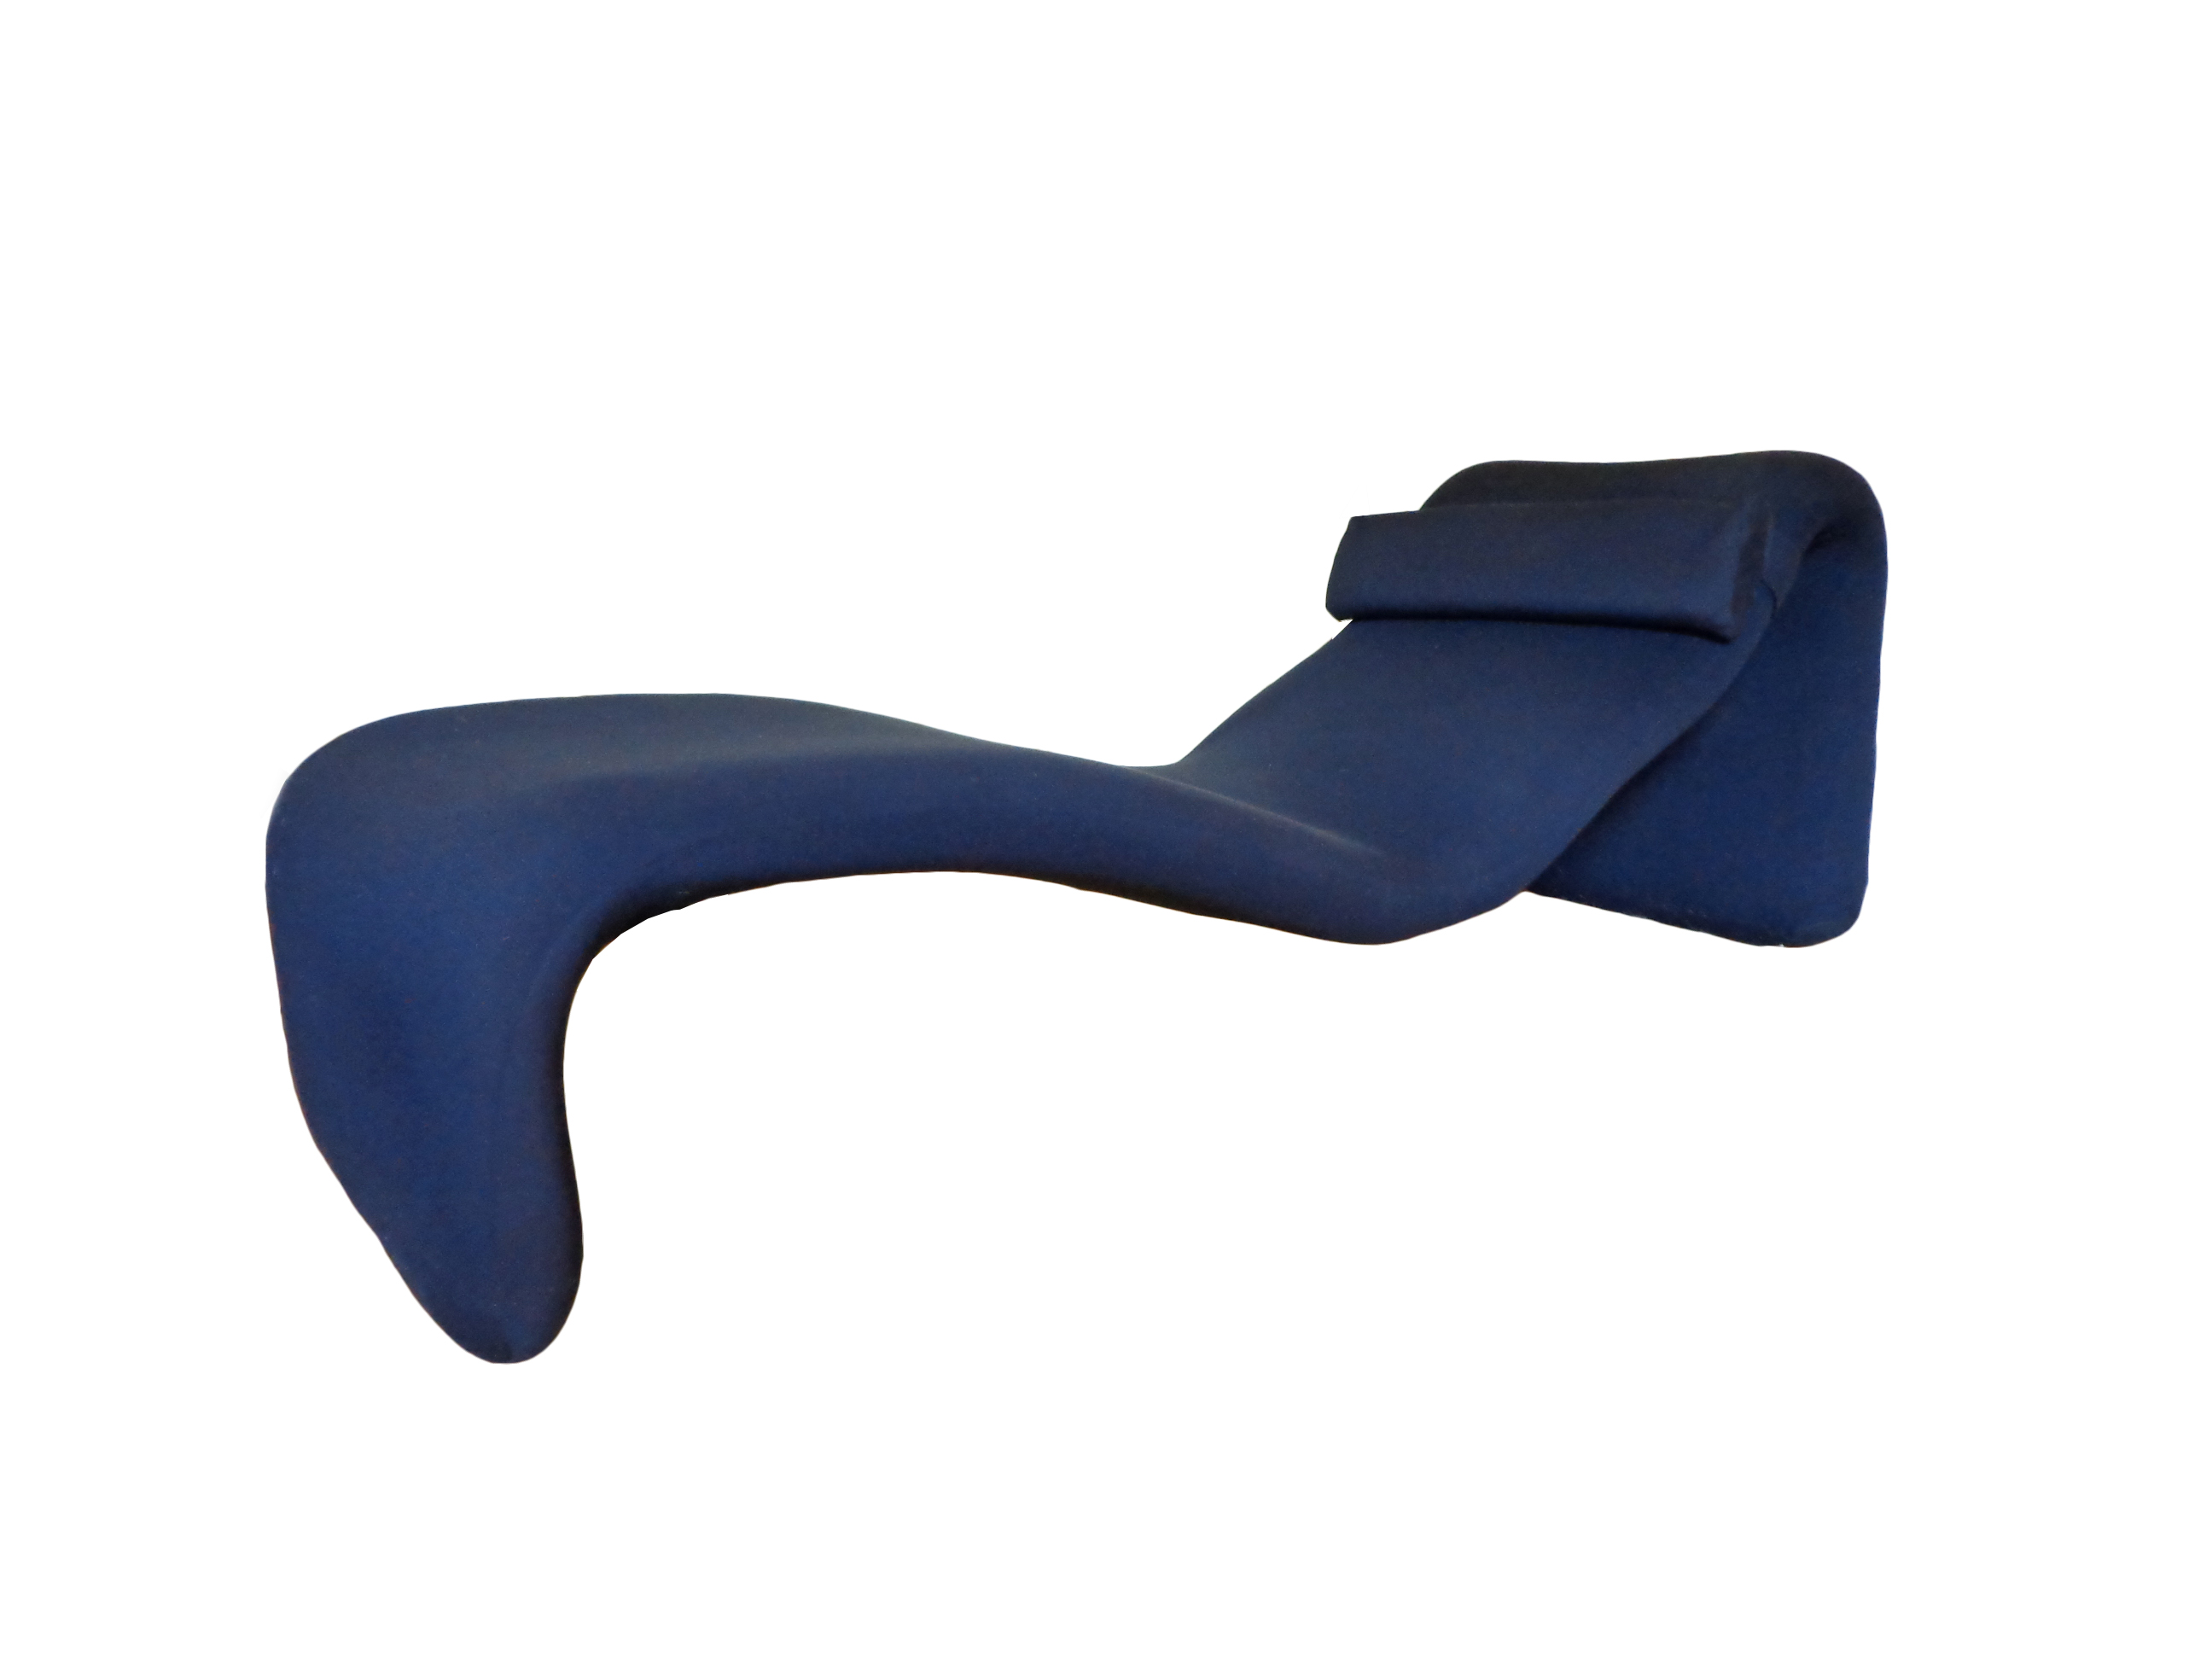 Olivier Mourgue djinn chaise lounge for Airborne Int.